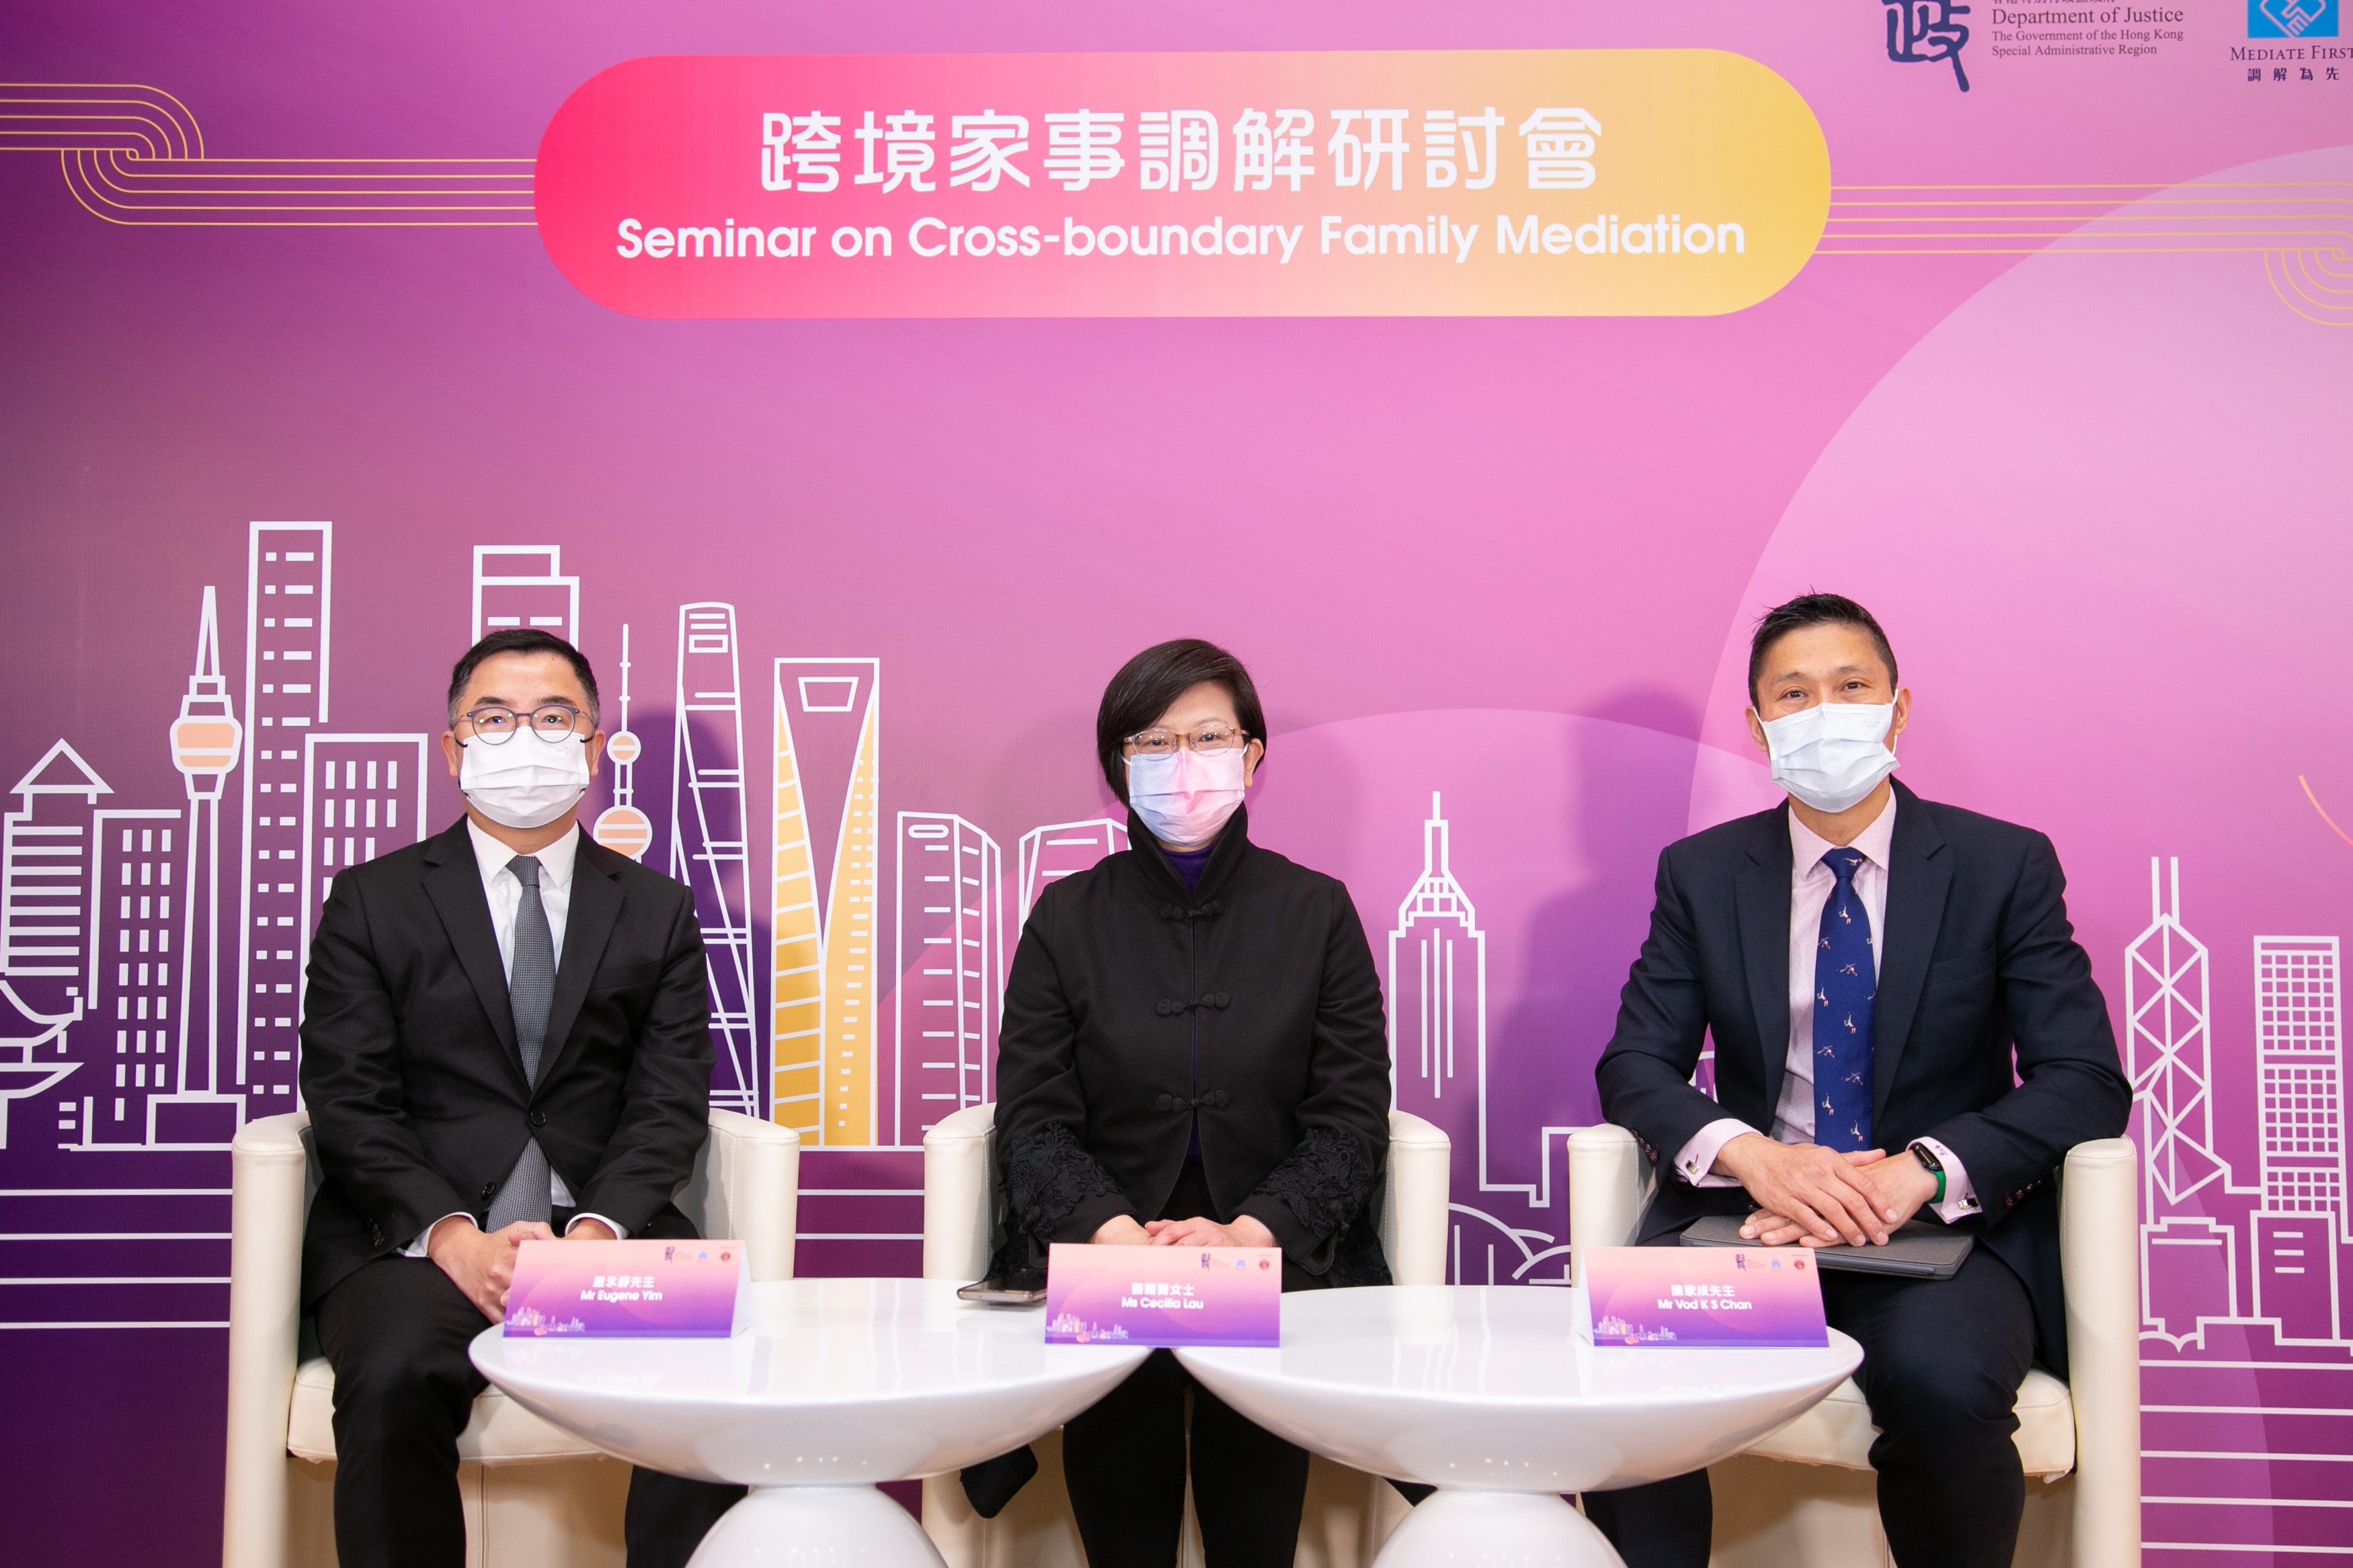 Seminar on Cross-boundary Family Mediation was organised online on February 16 by the Department of Justice.  Photo shows the Moderator, Mr Vod K S Chan (first right) with the speakers (from centre to left): Ms Cecilia Lau and Mr Eugene Yim.